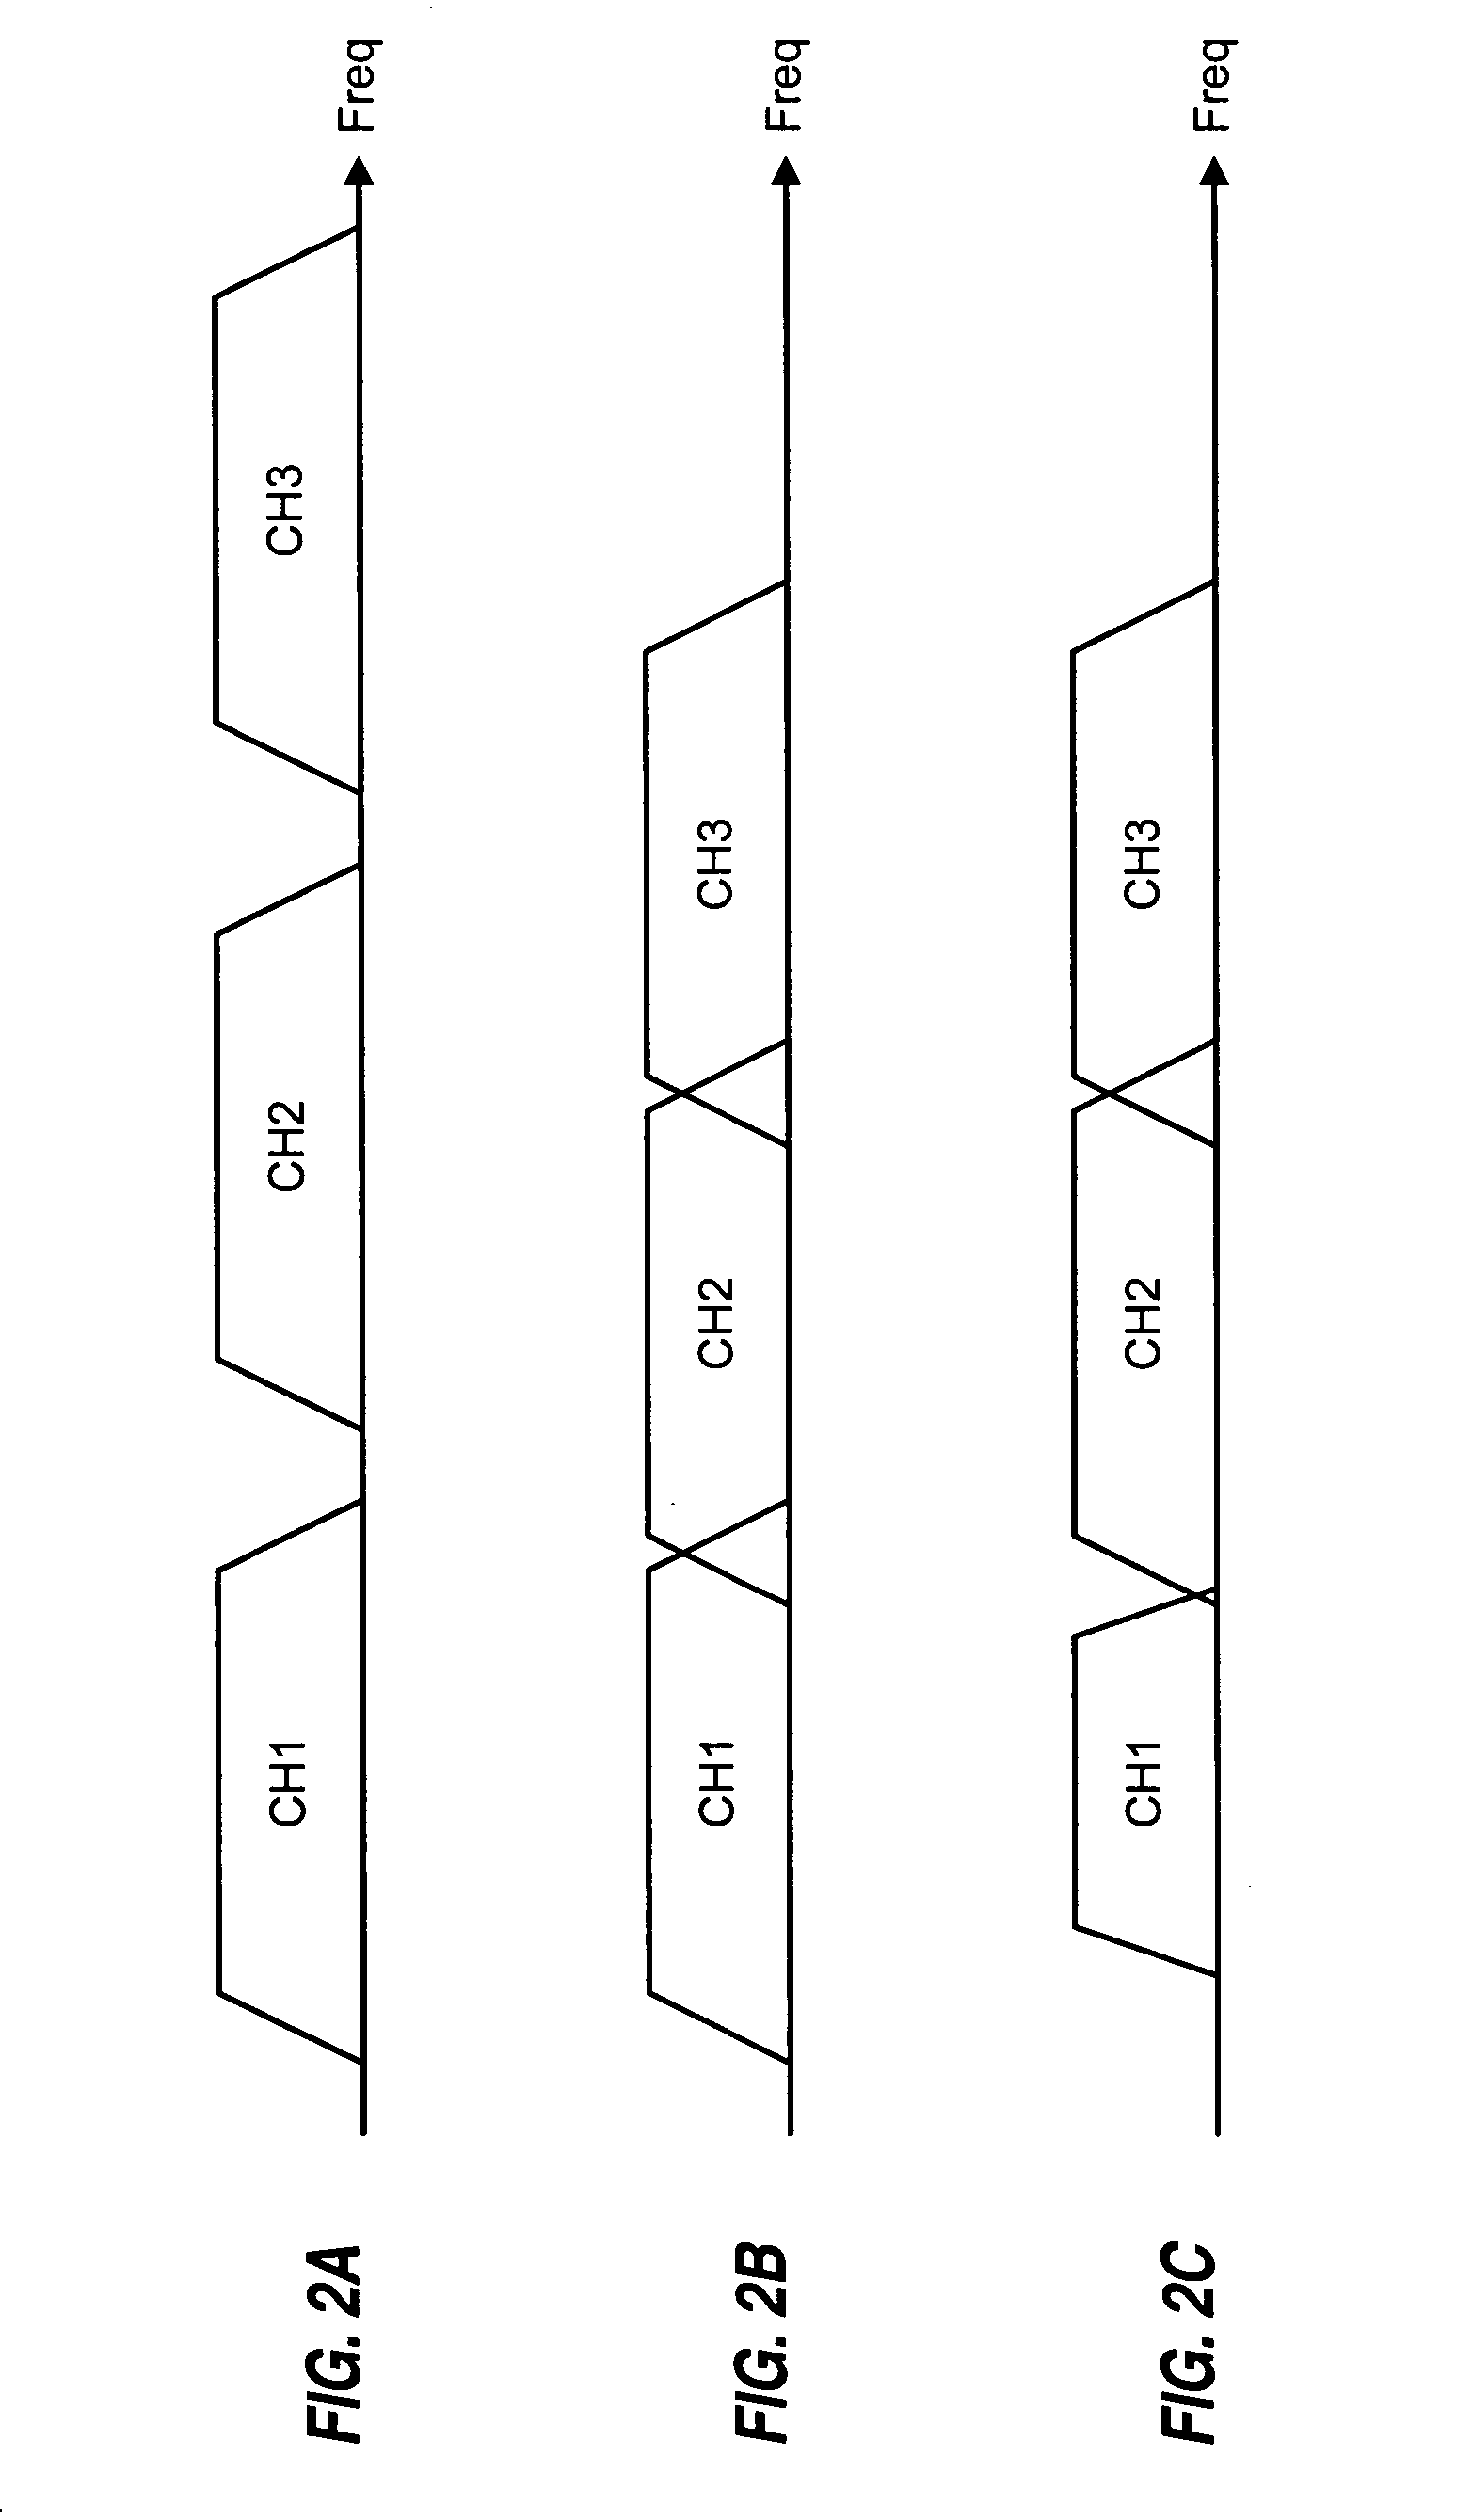 Noise reduction filtering in a wireless communication system